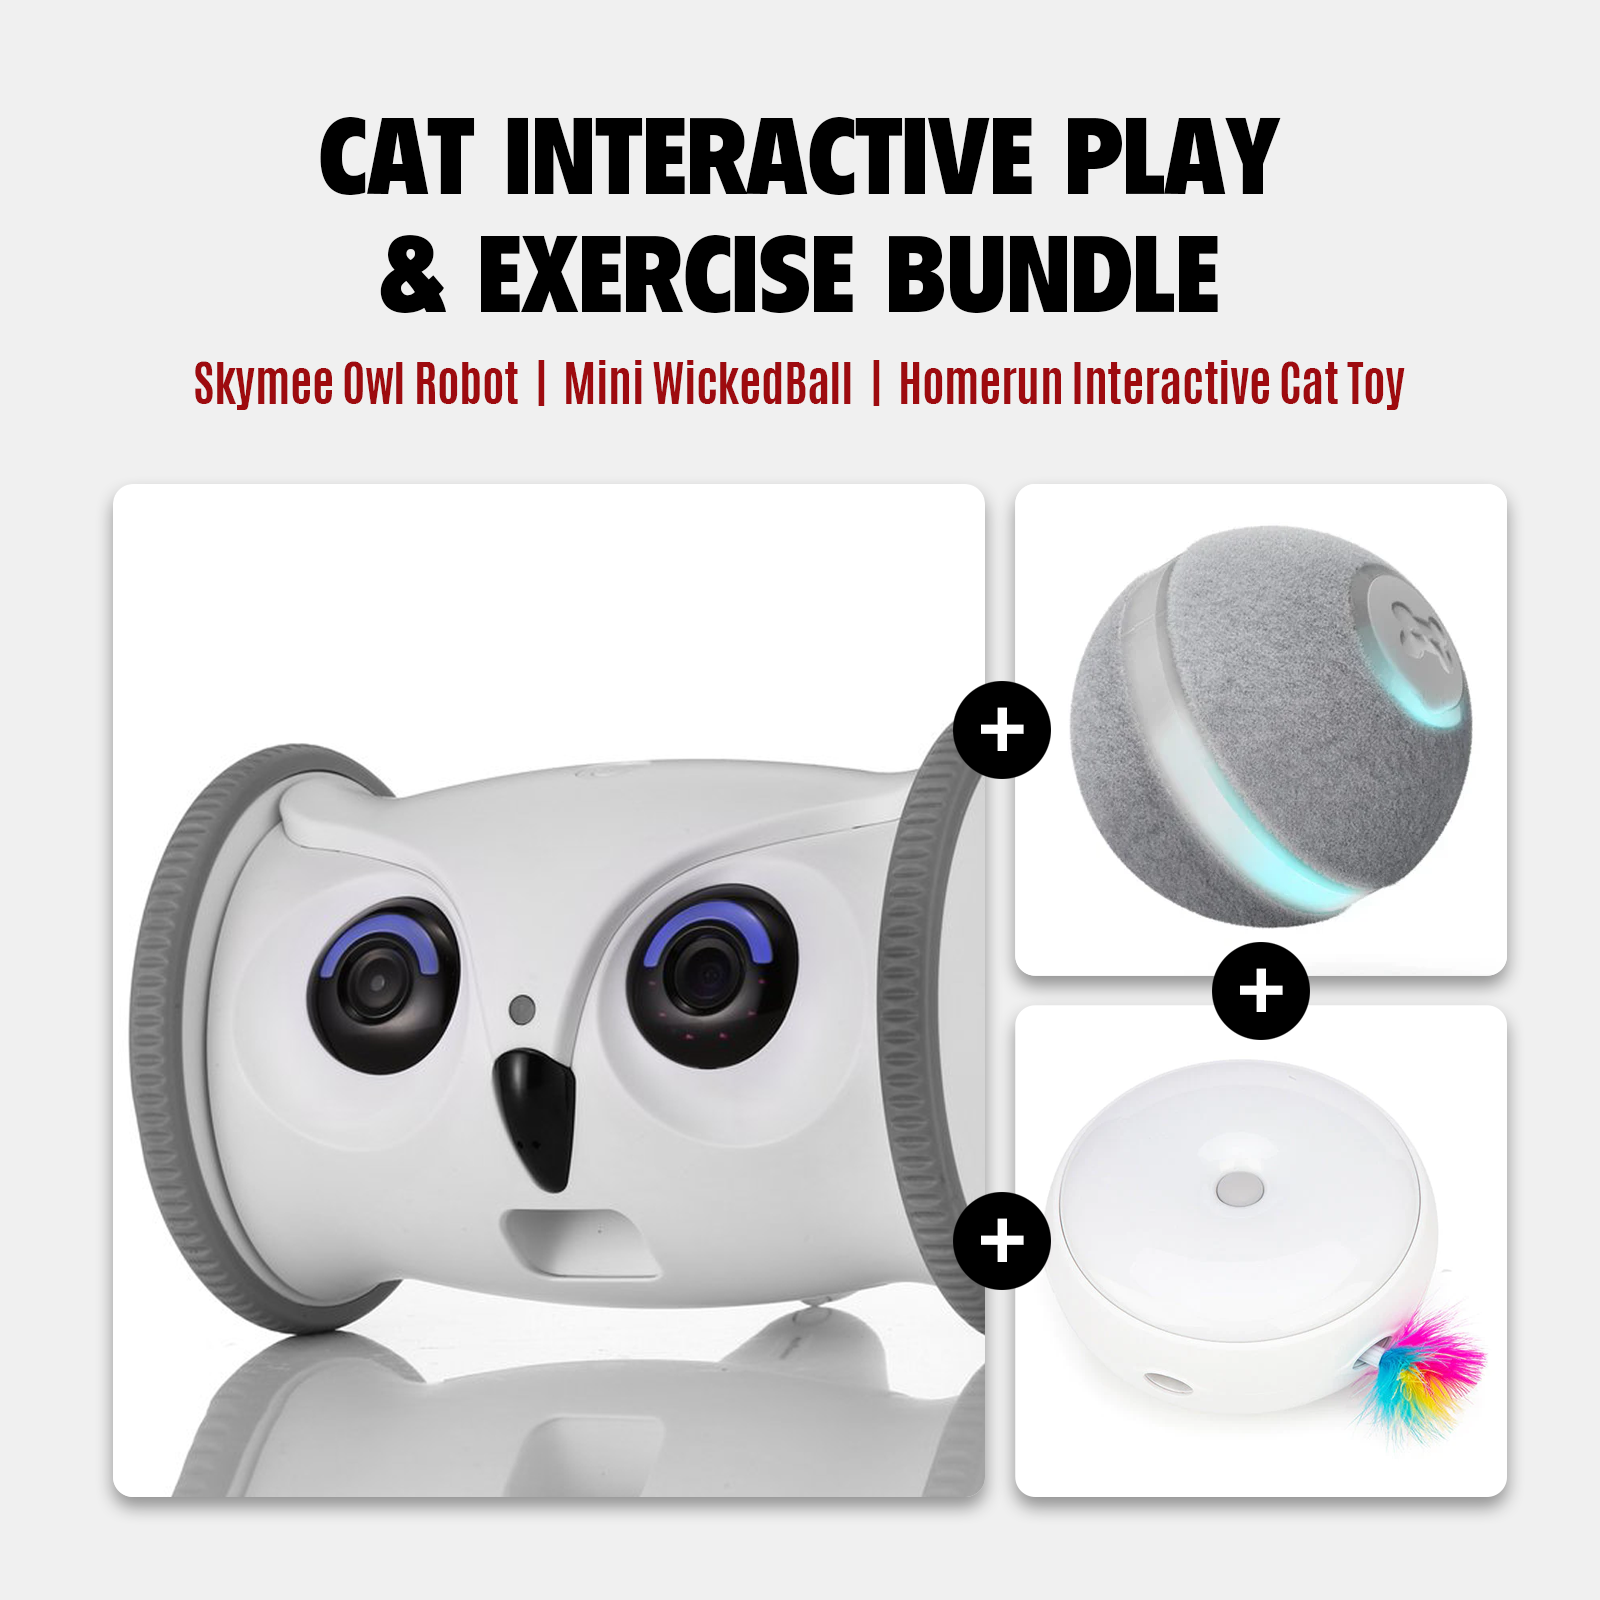 Cat Interactive Play & Exercise Bundle